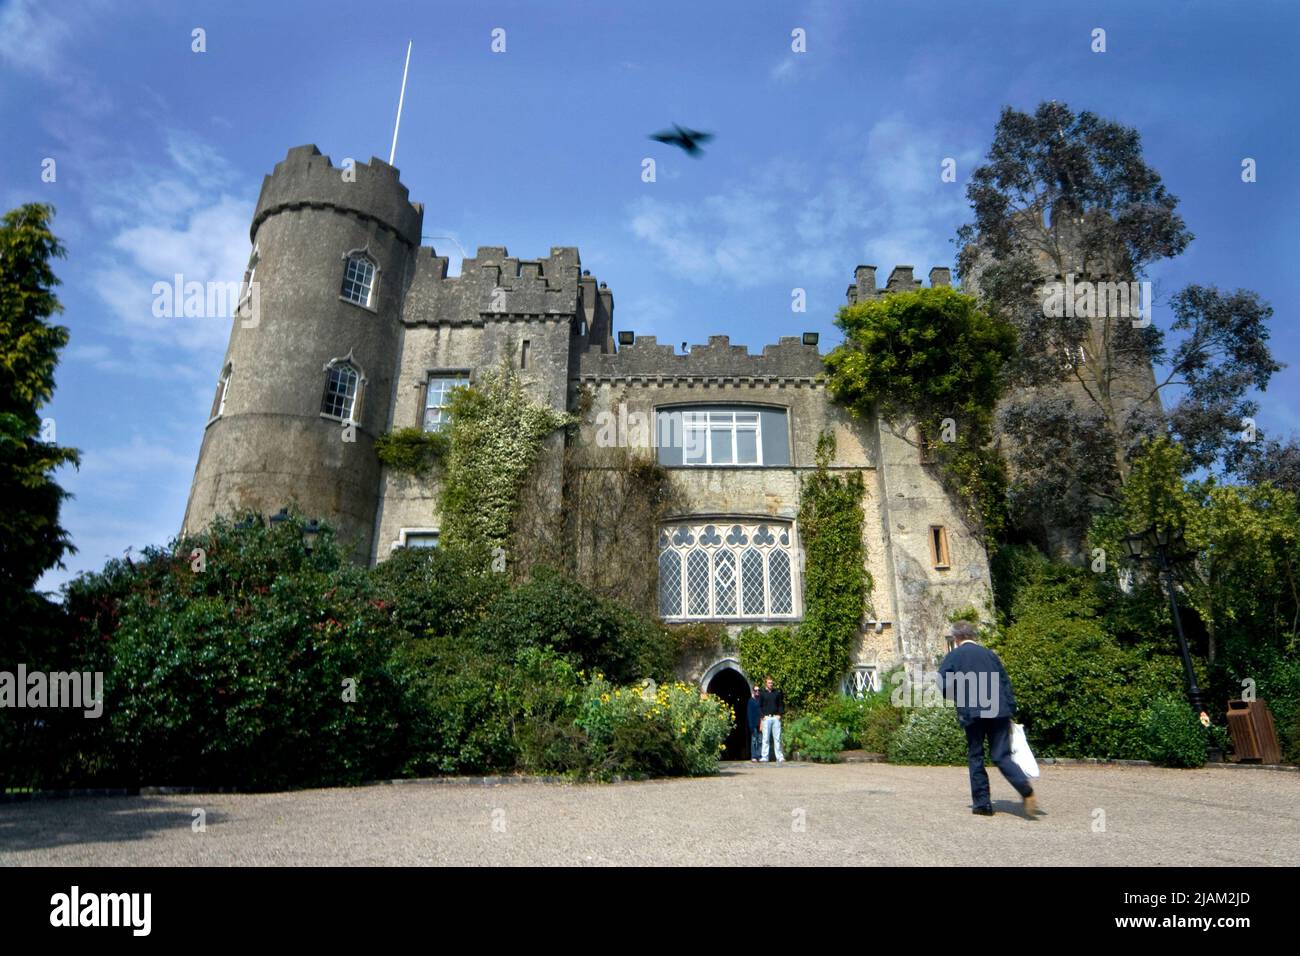 Malahide Castle is a Norman structure in north county Dublin, Ireland. et on 250 acres of park land in the pretty seaside town of Malahide. Stock Photo